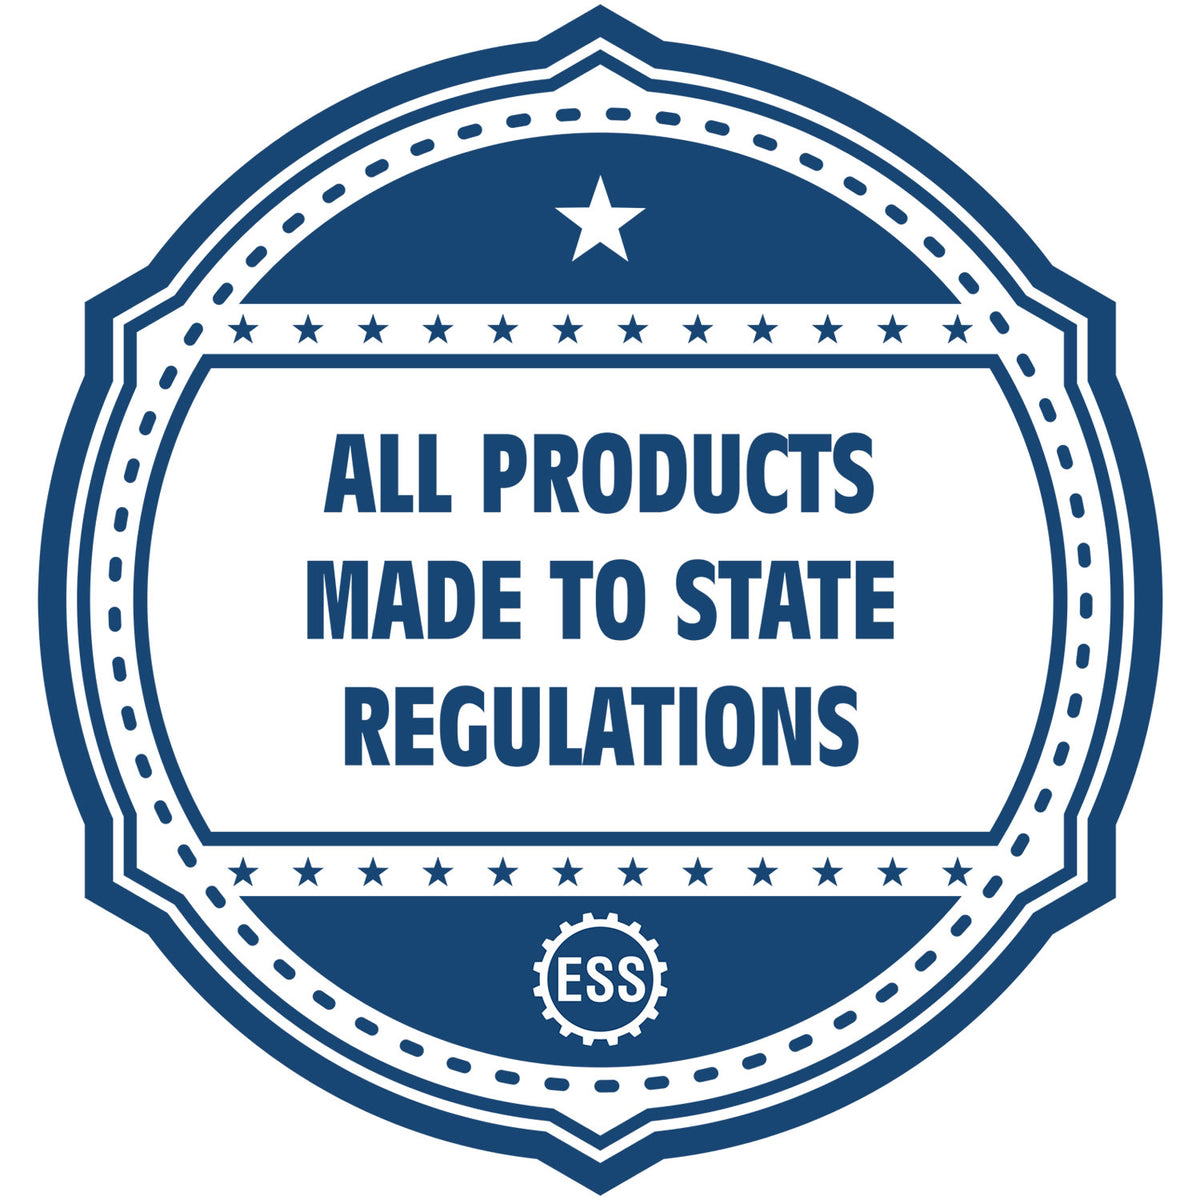 An icon or badge element for the Wooden Handle Texas State Seal Notary Public Stamp showing that this product is made in compliance with state regulations.